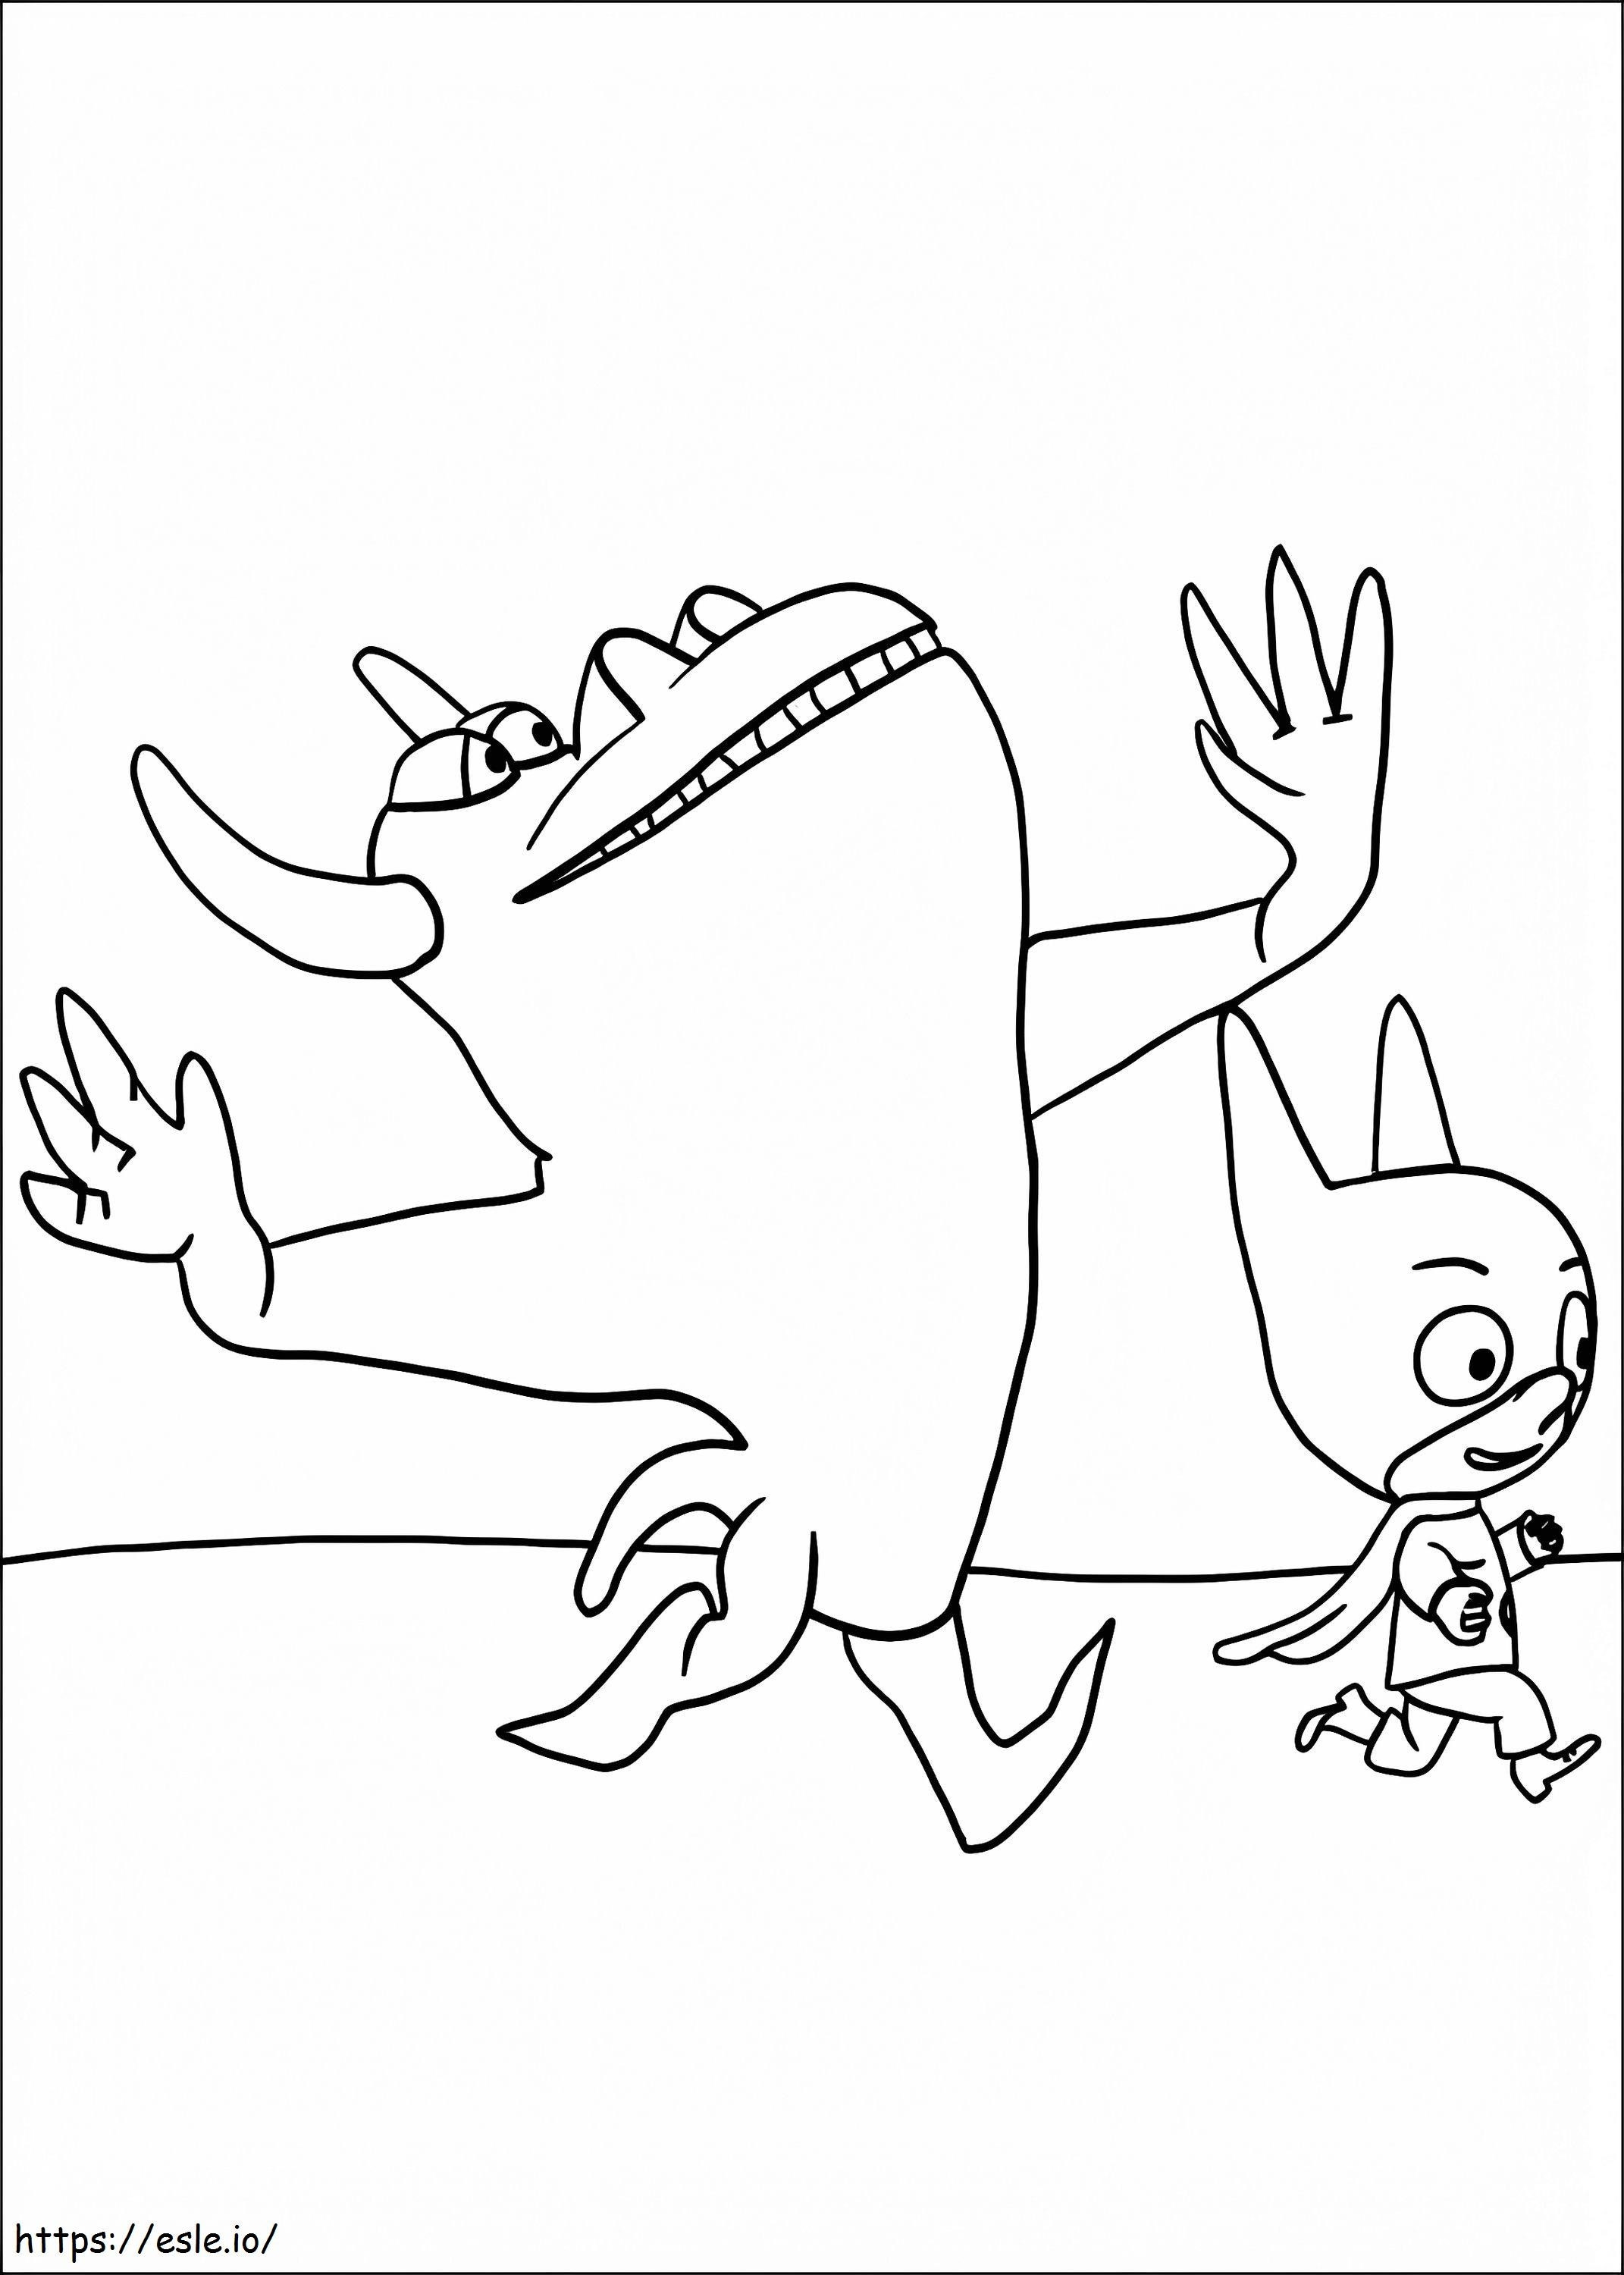 Crocochemar And Sam Sam coloring page